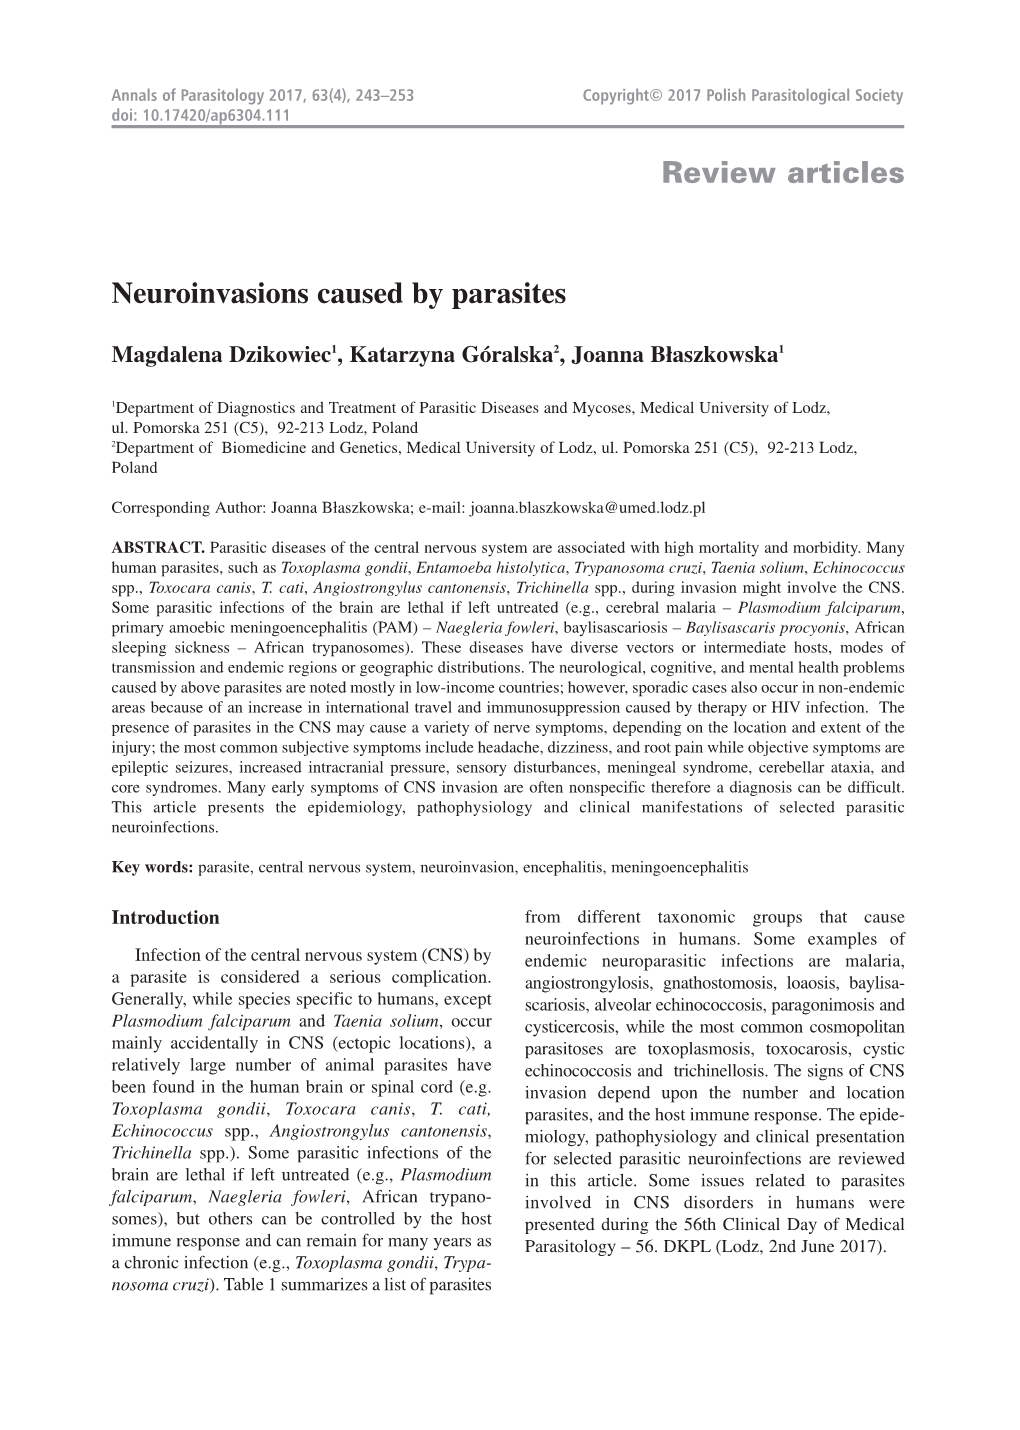 Review Articles Neuroinvasions Caused by Parasites